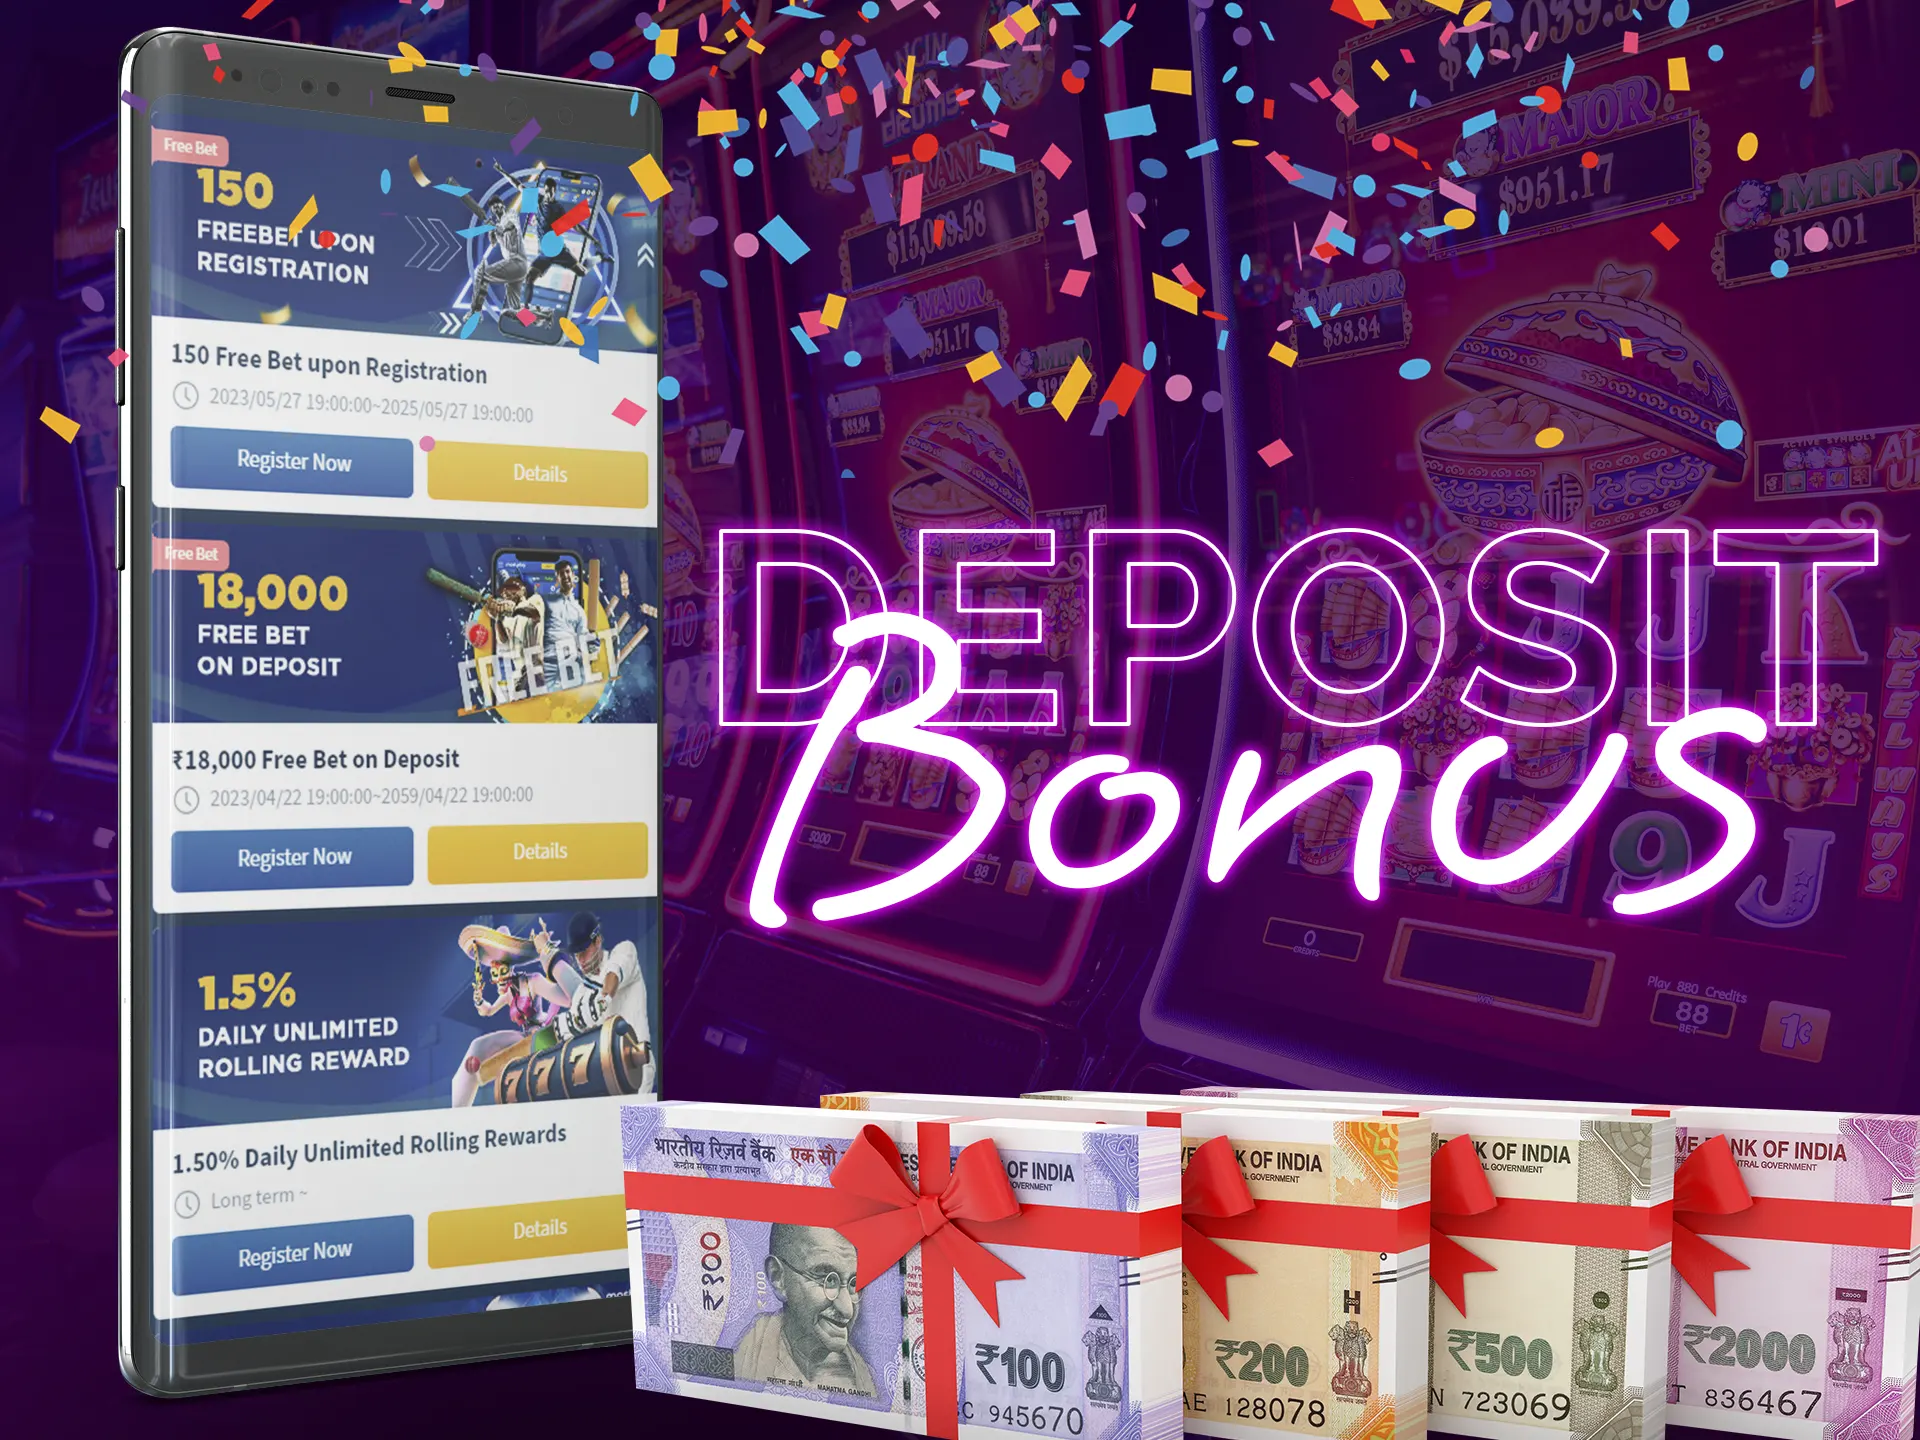 A deposit bonus is the awarding of any cash amounts or free spins for funding your gaming account.